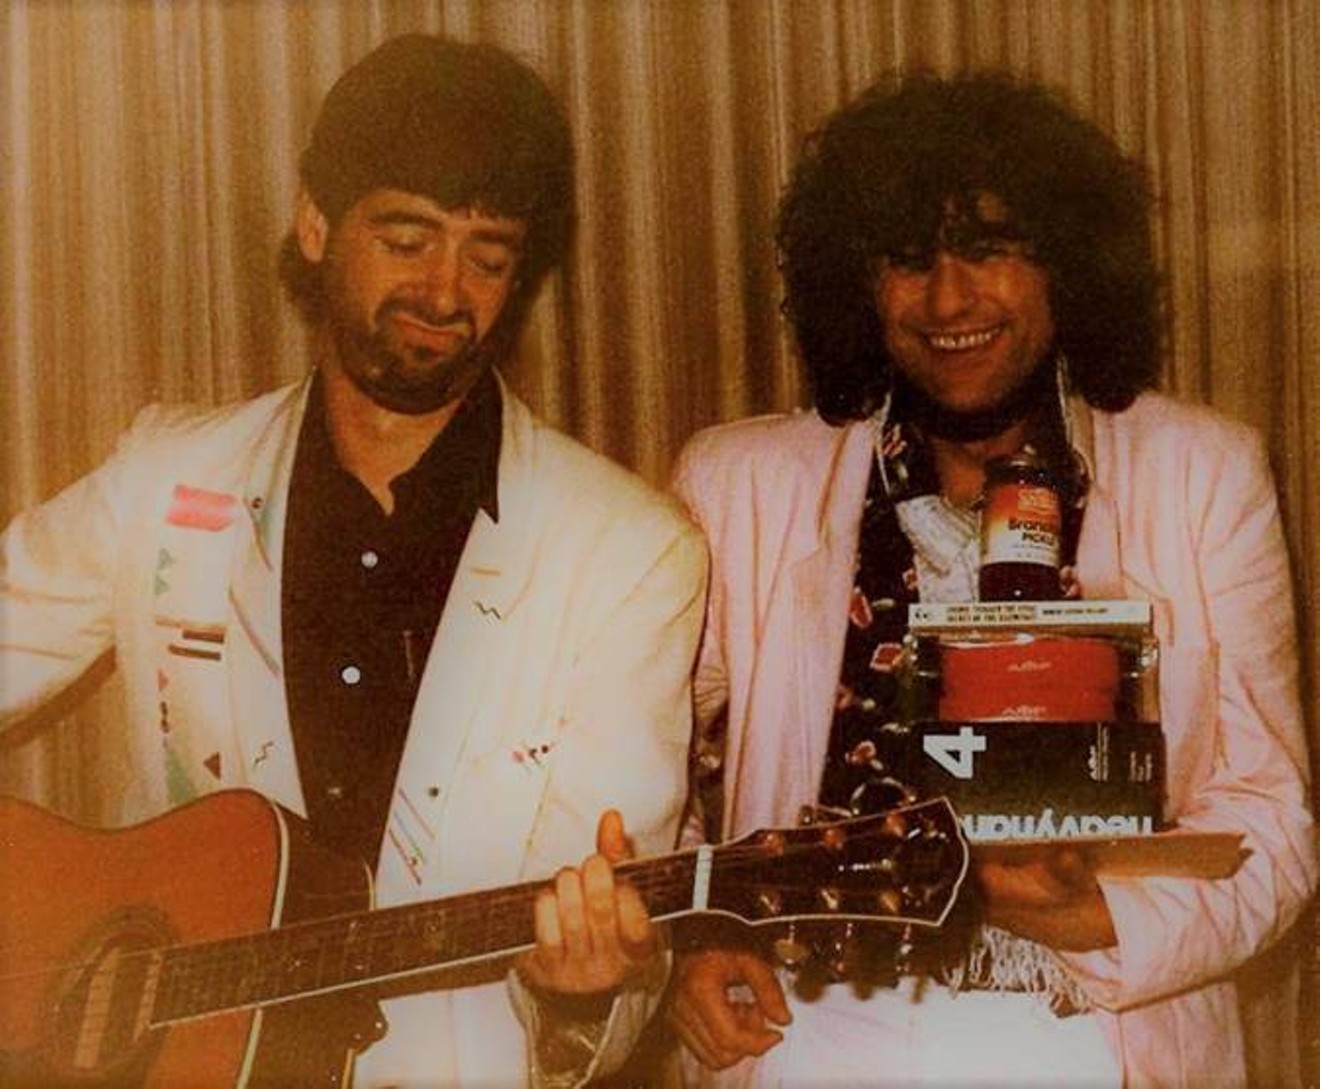 The photo that proves it happened. Jimmy Page is to the right, Bucks Burnett at left with guitar.